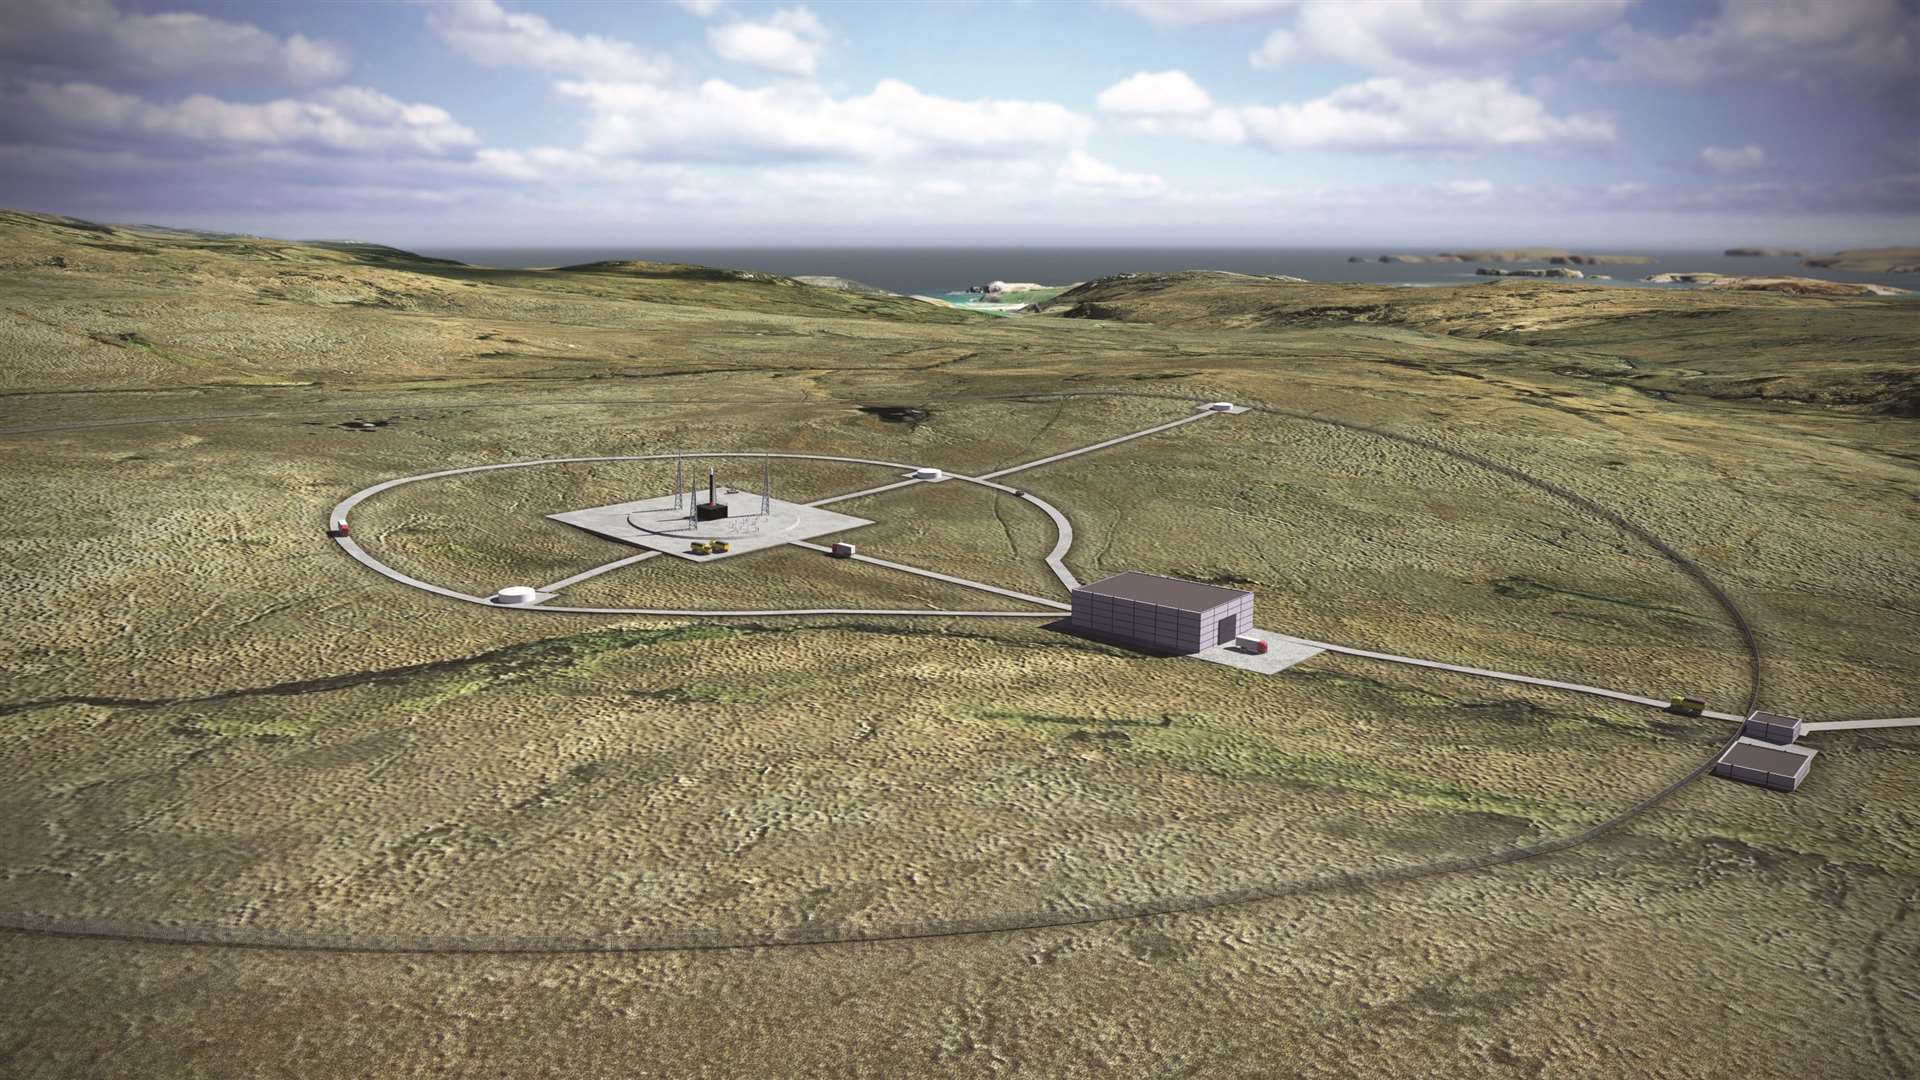 How the proposed spaceport site would look.